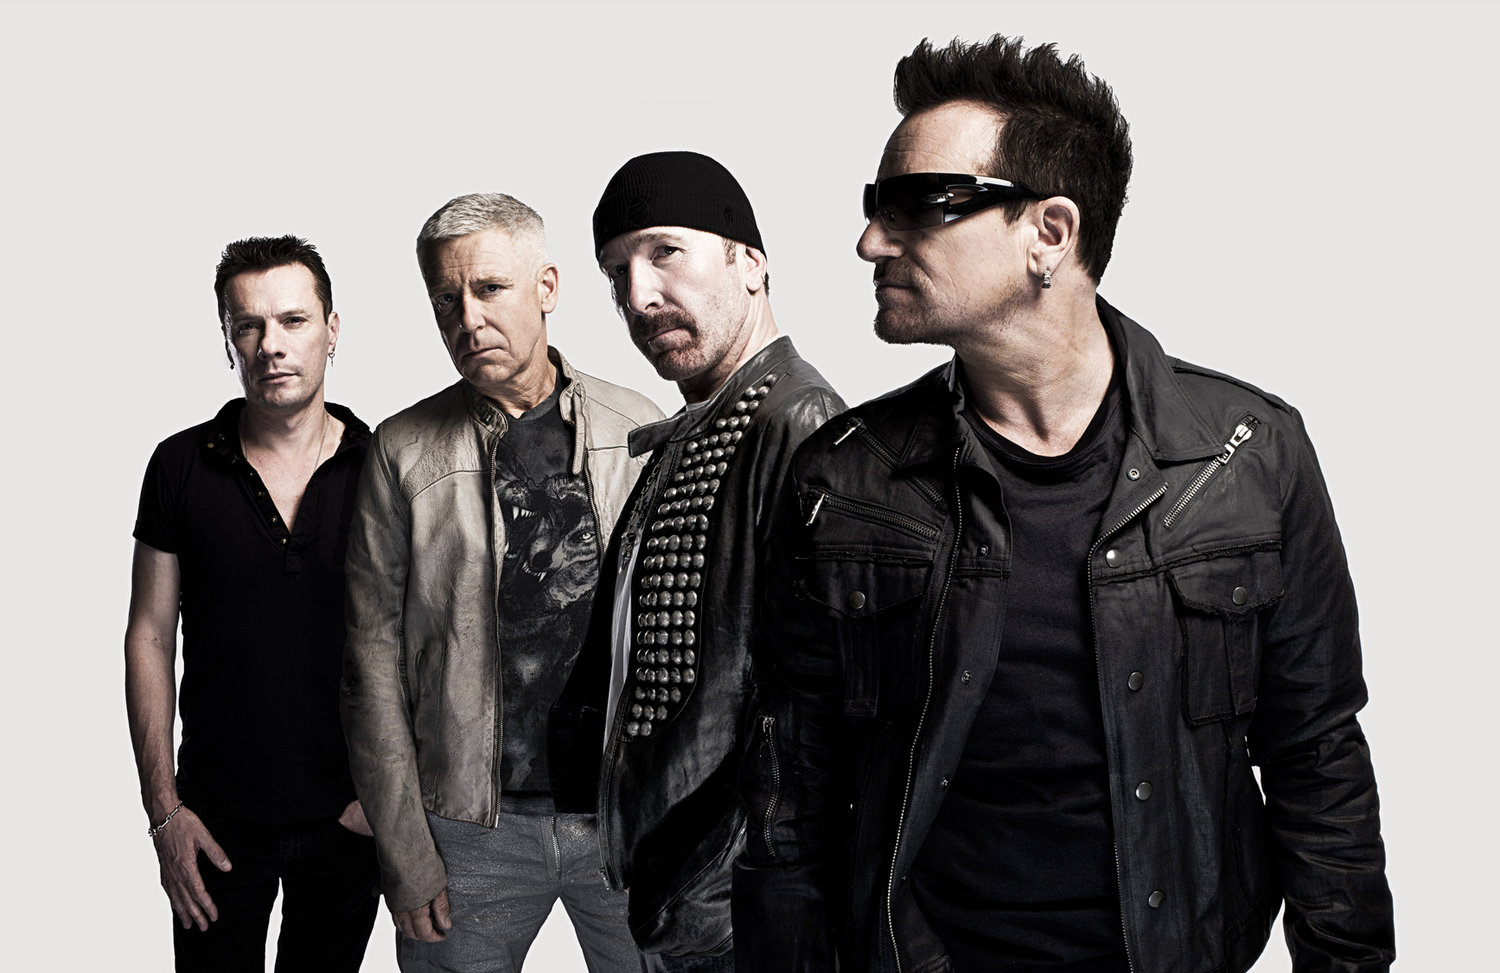 Is U2 the Greatest Rock Band of All-Time?